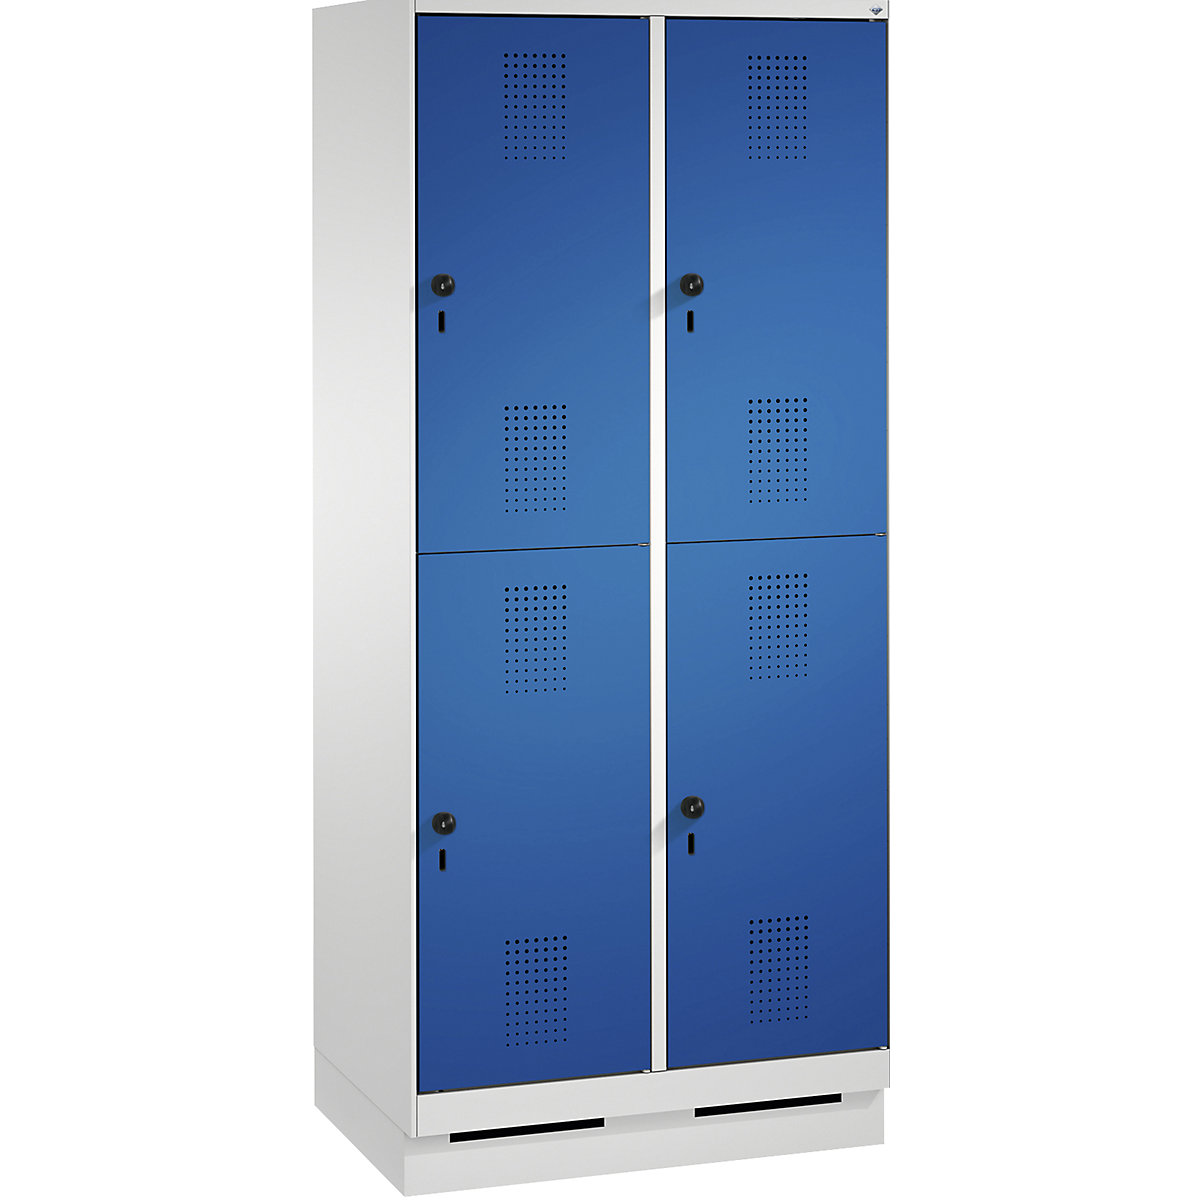 EVOLO cloakroom locker, double tier, with plinth – C+P, 2 compartments, 2 shelf compartments each, compartment width 400 mm, light grey / gentian blue-8